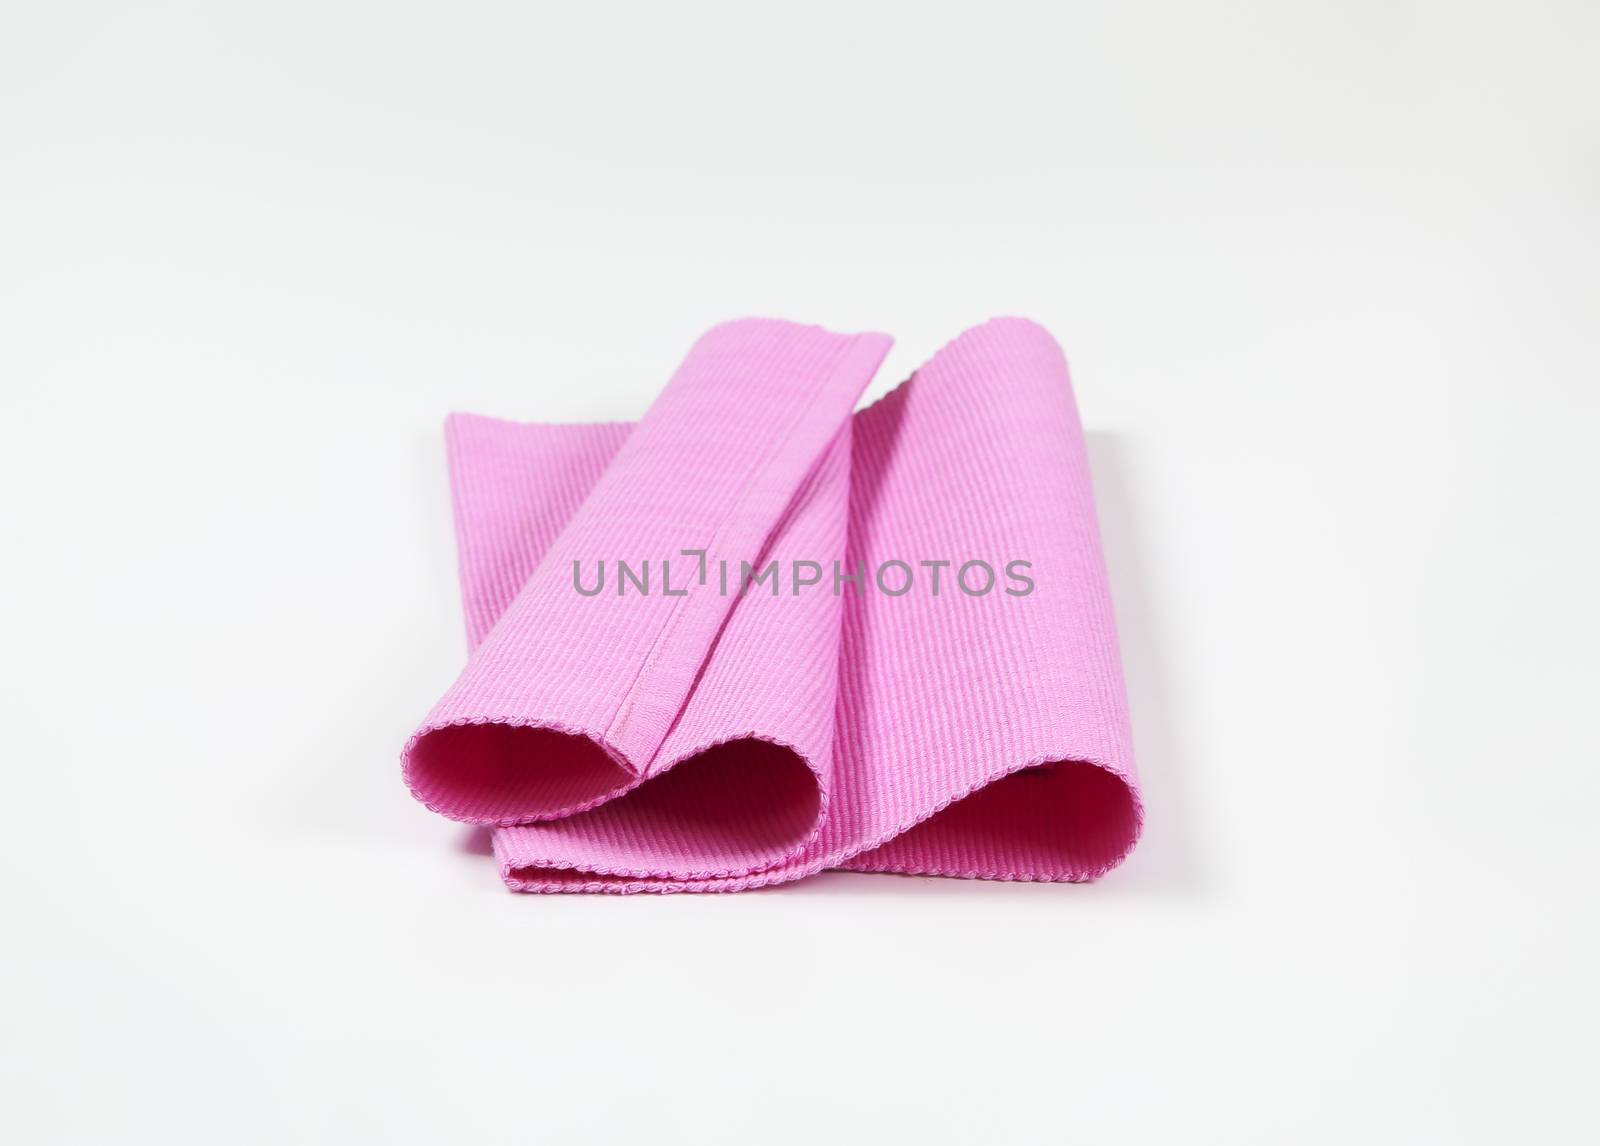 Ribbed pink placemat by Digifoodstock